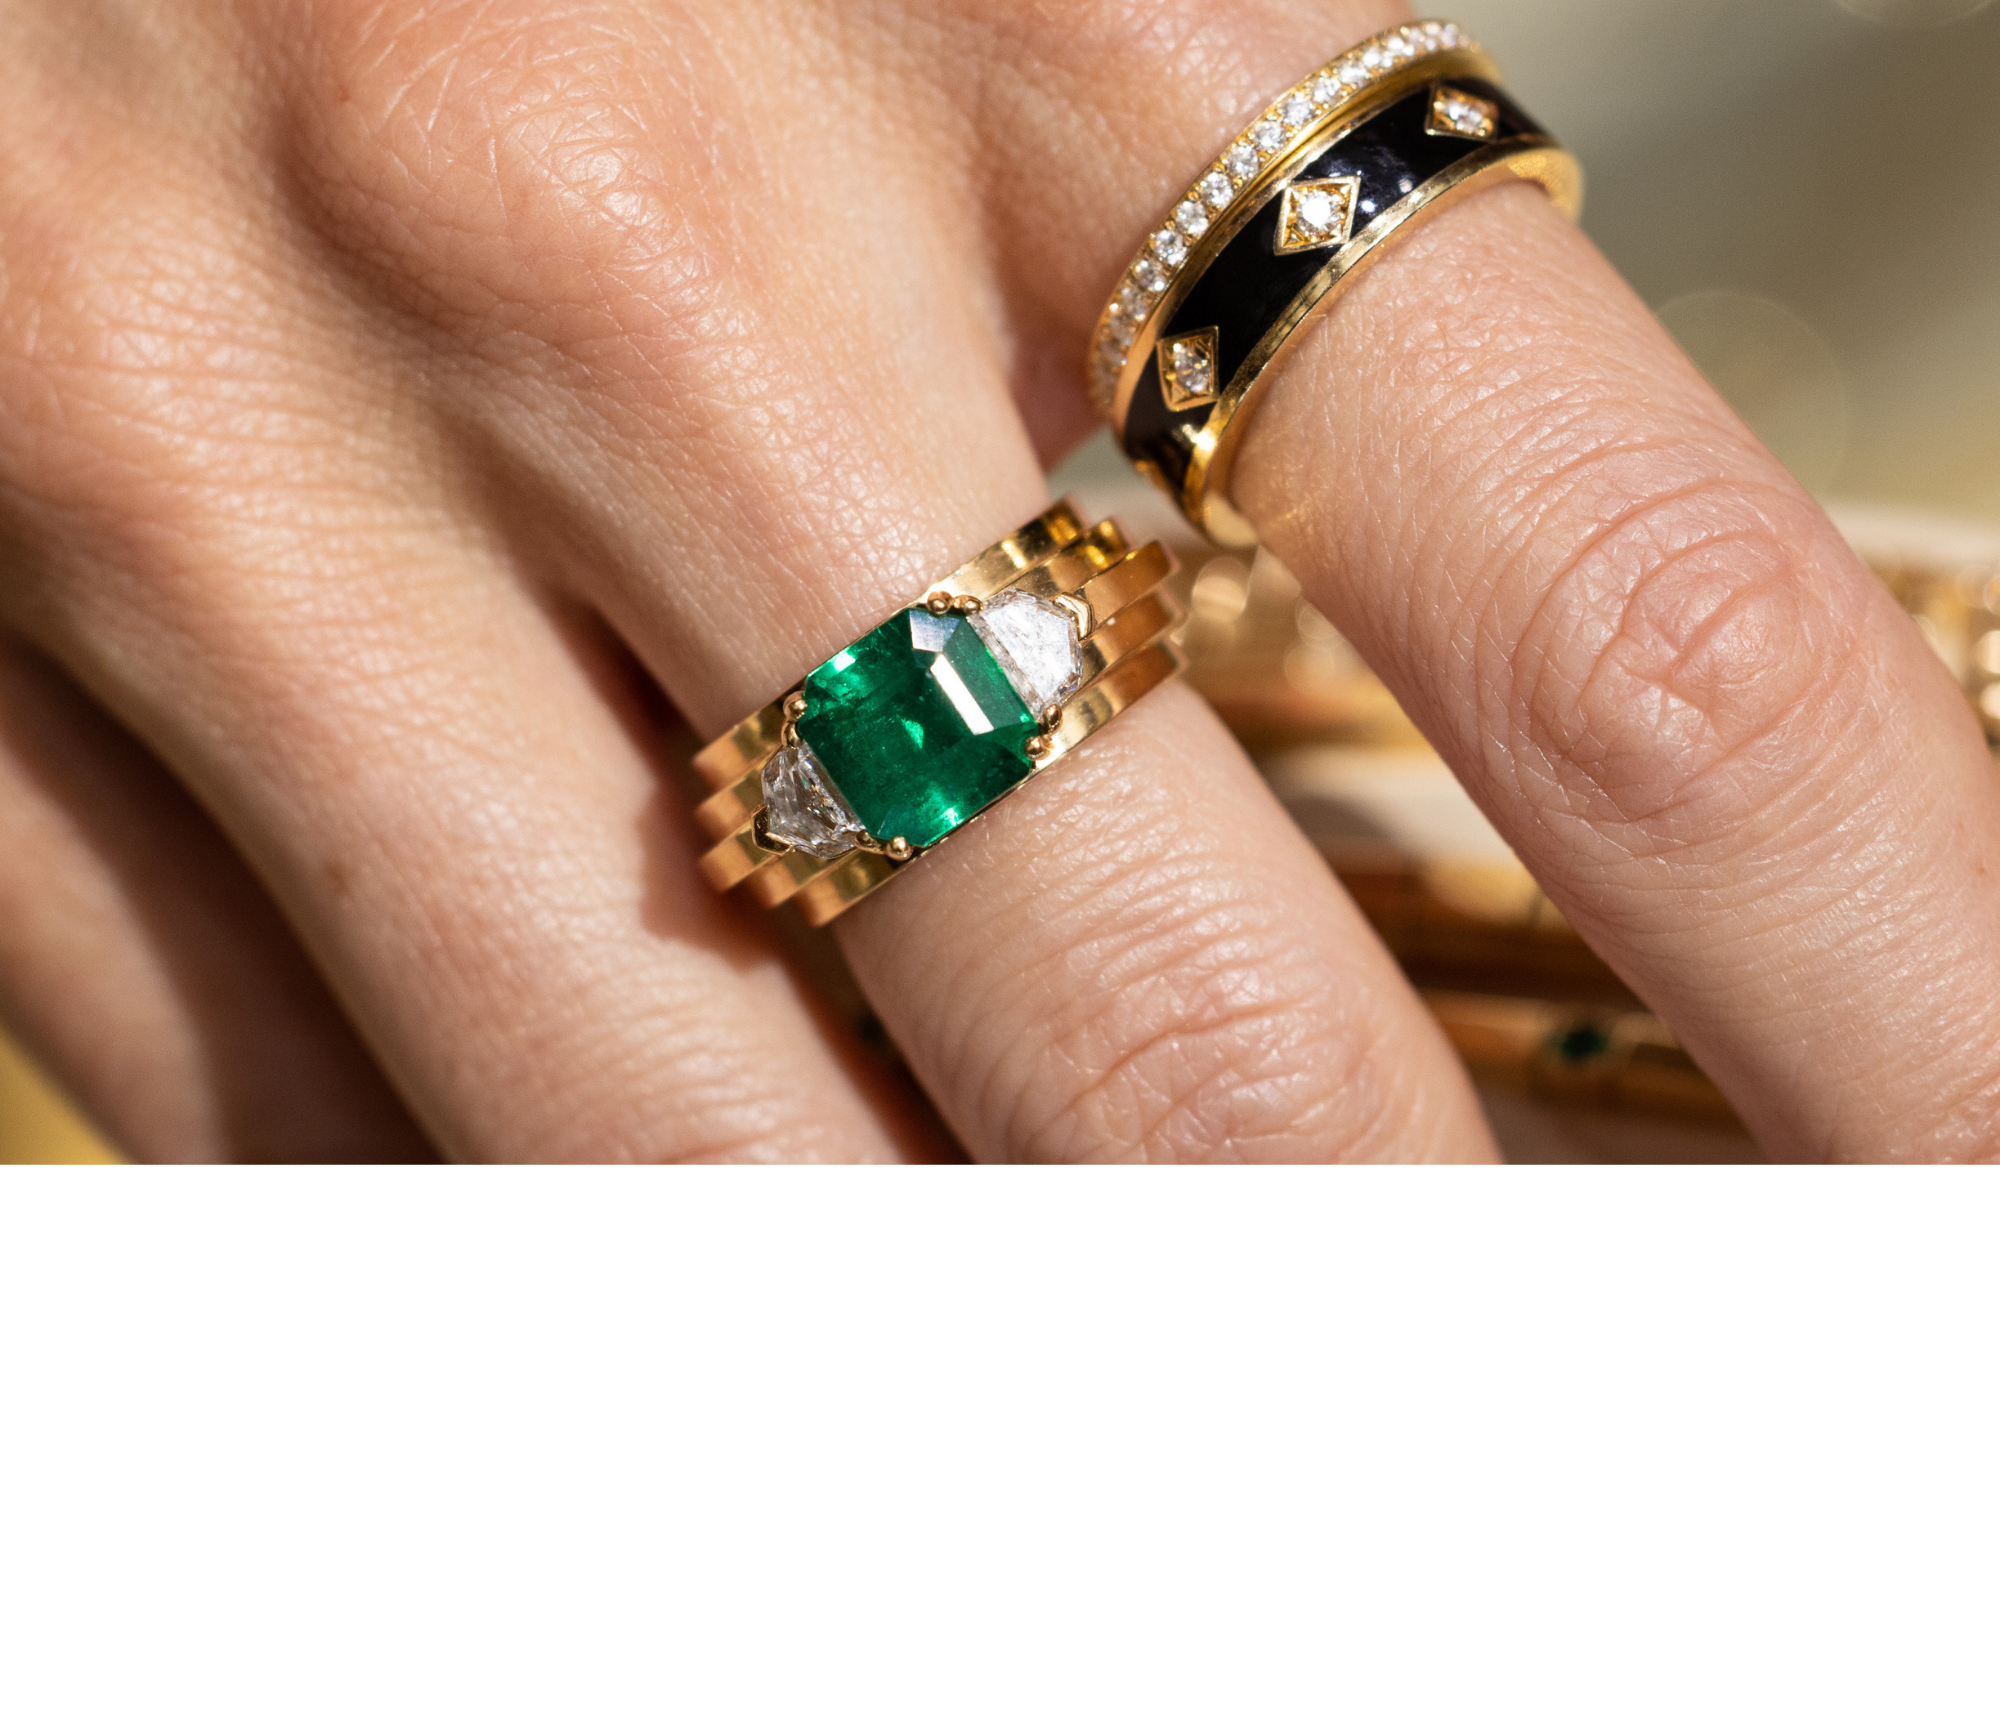 Emerald ring coming soon to Azlee